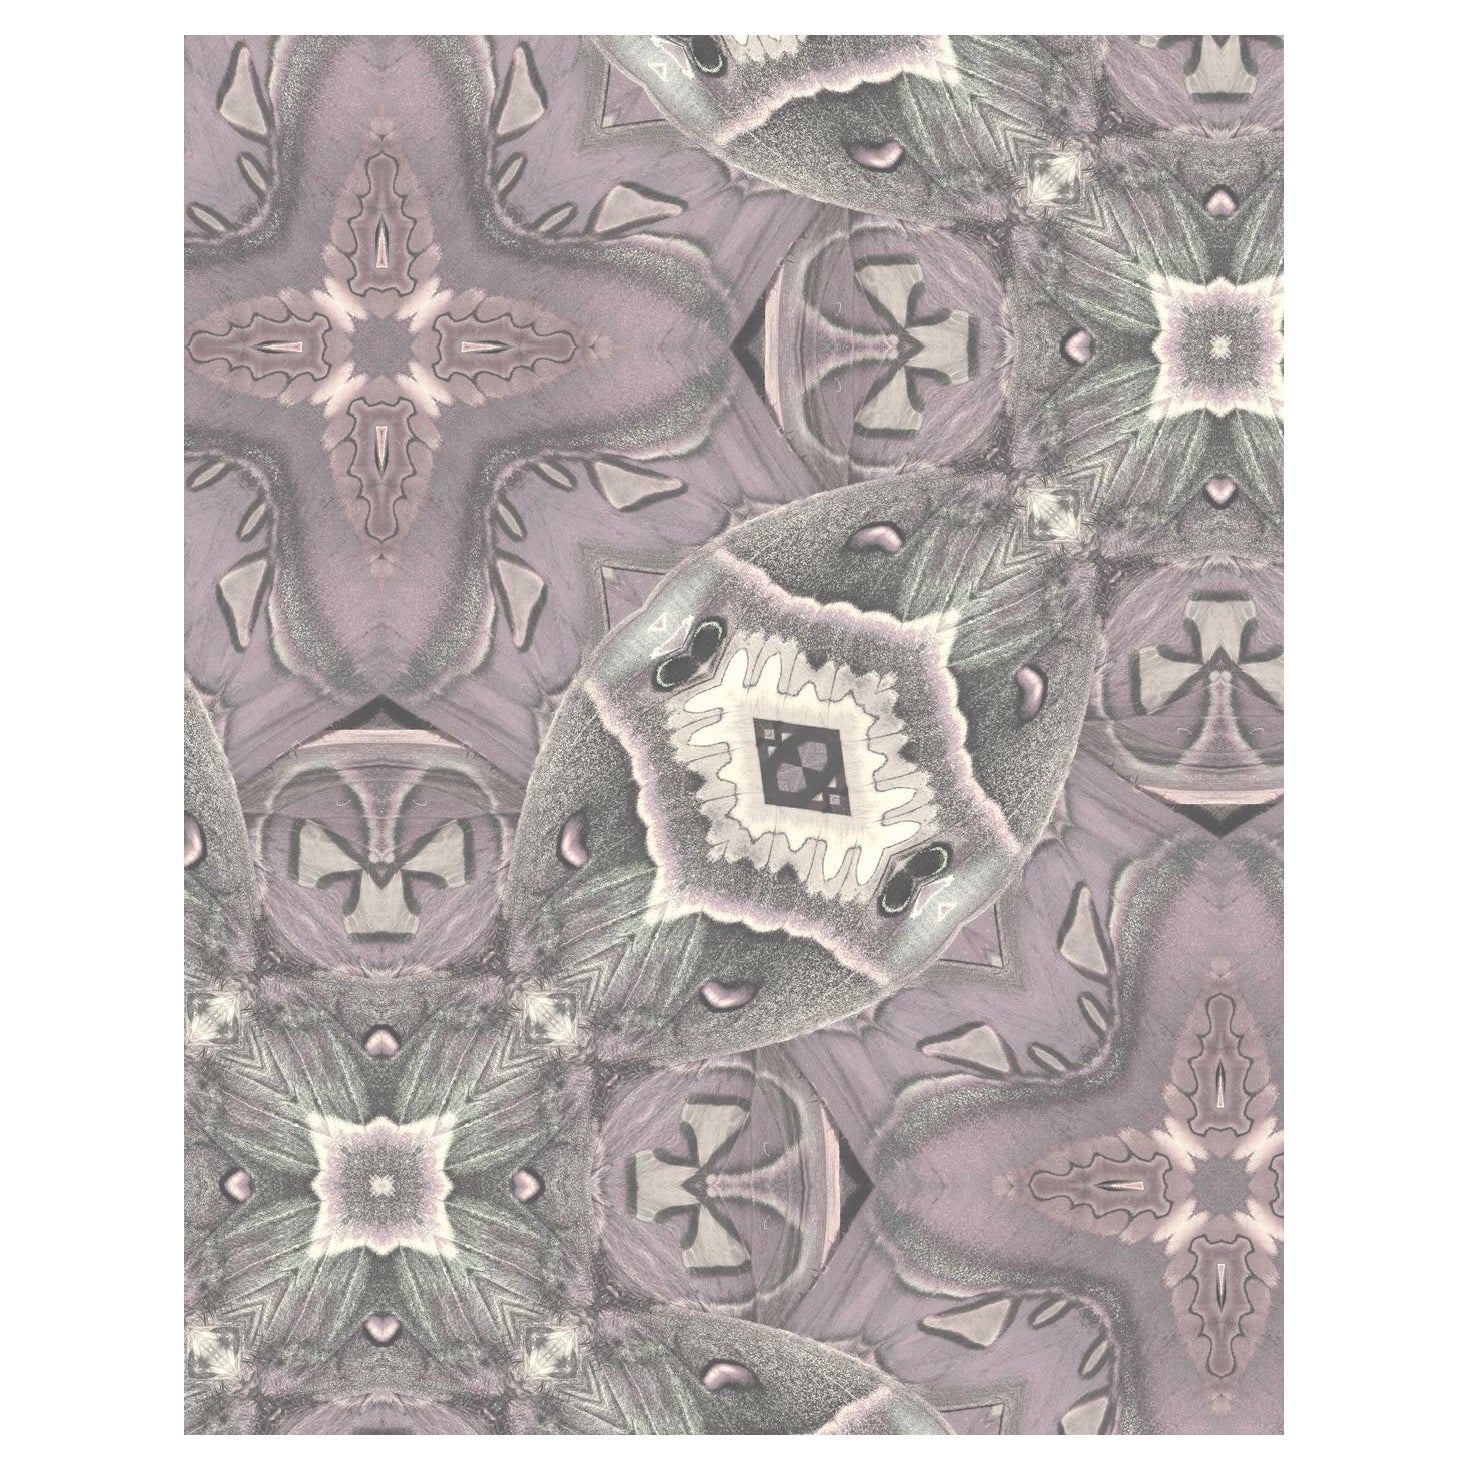  EDGE Collections Drifter Tapestry Nightsnow from our Drifter Series 